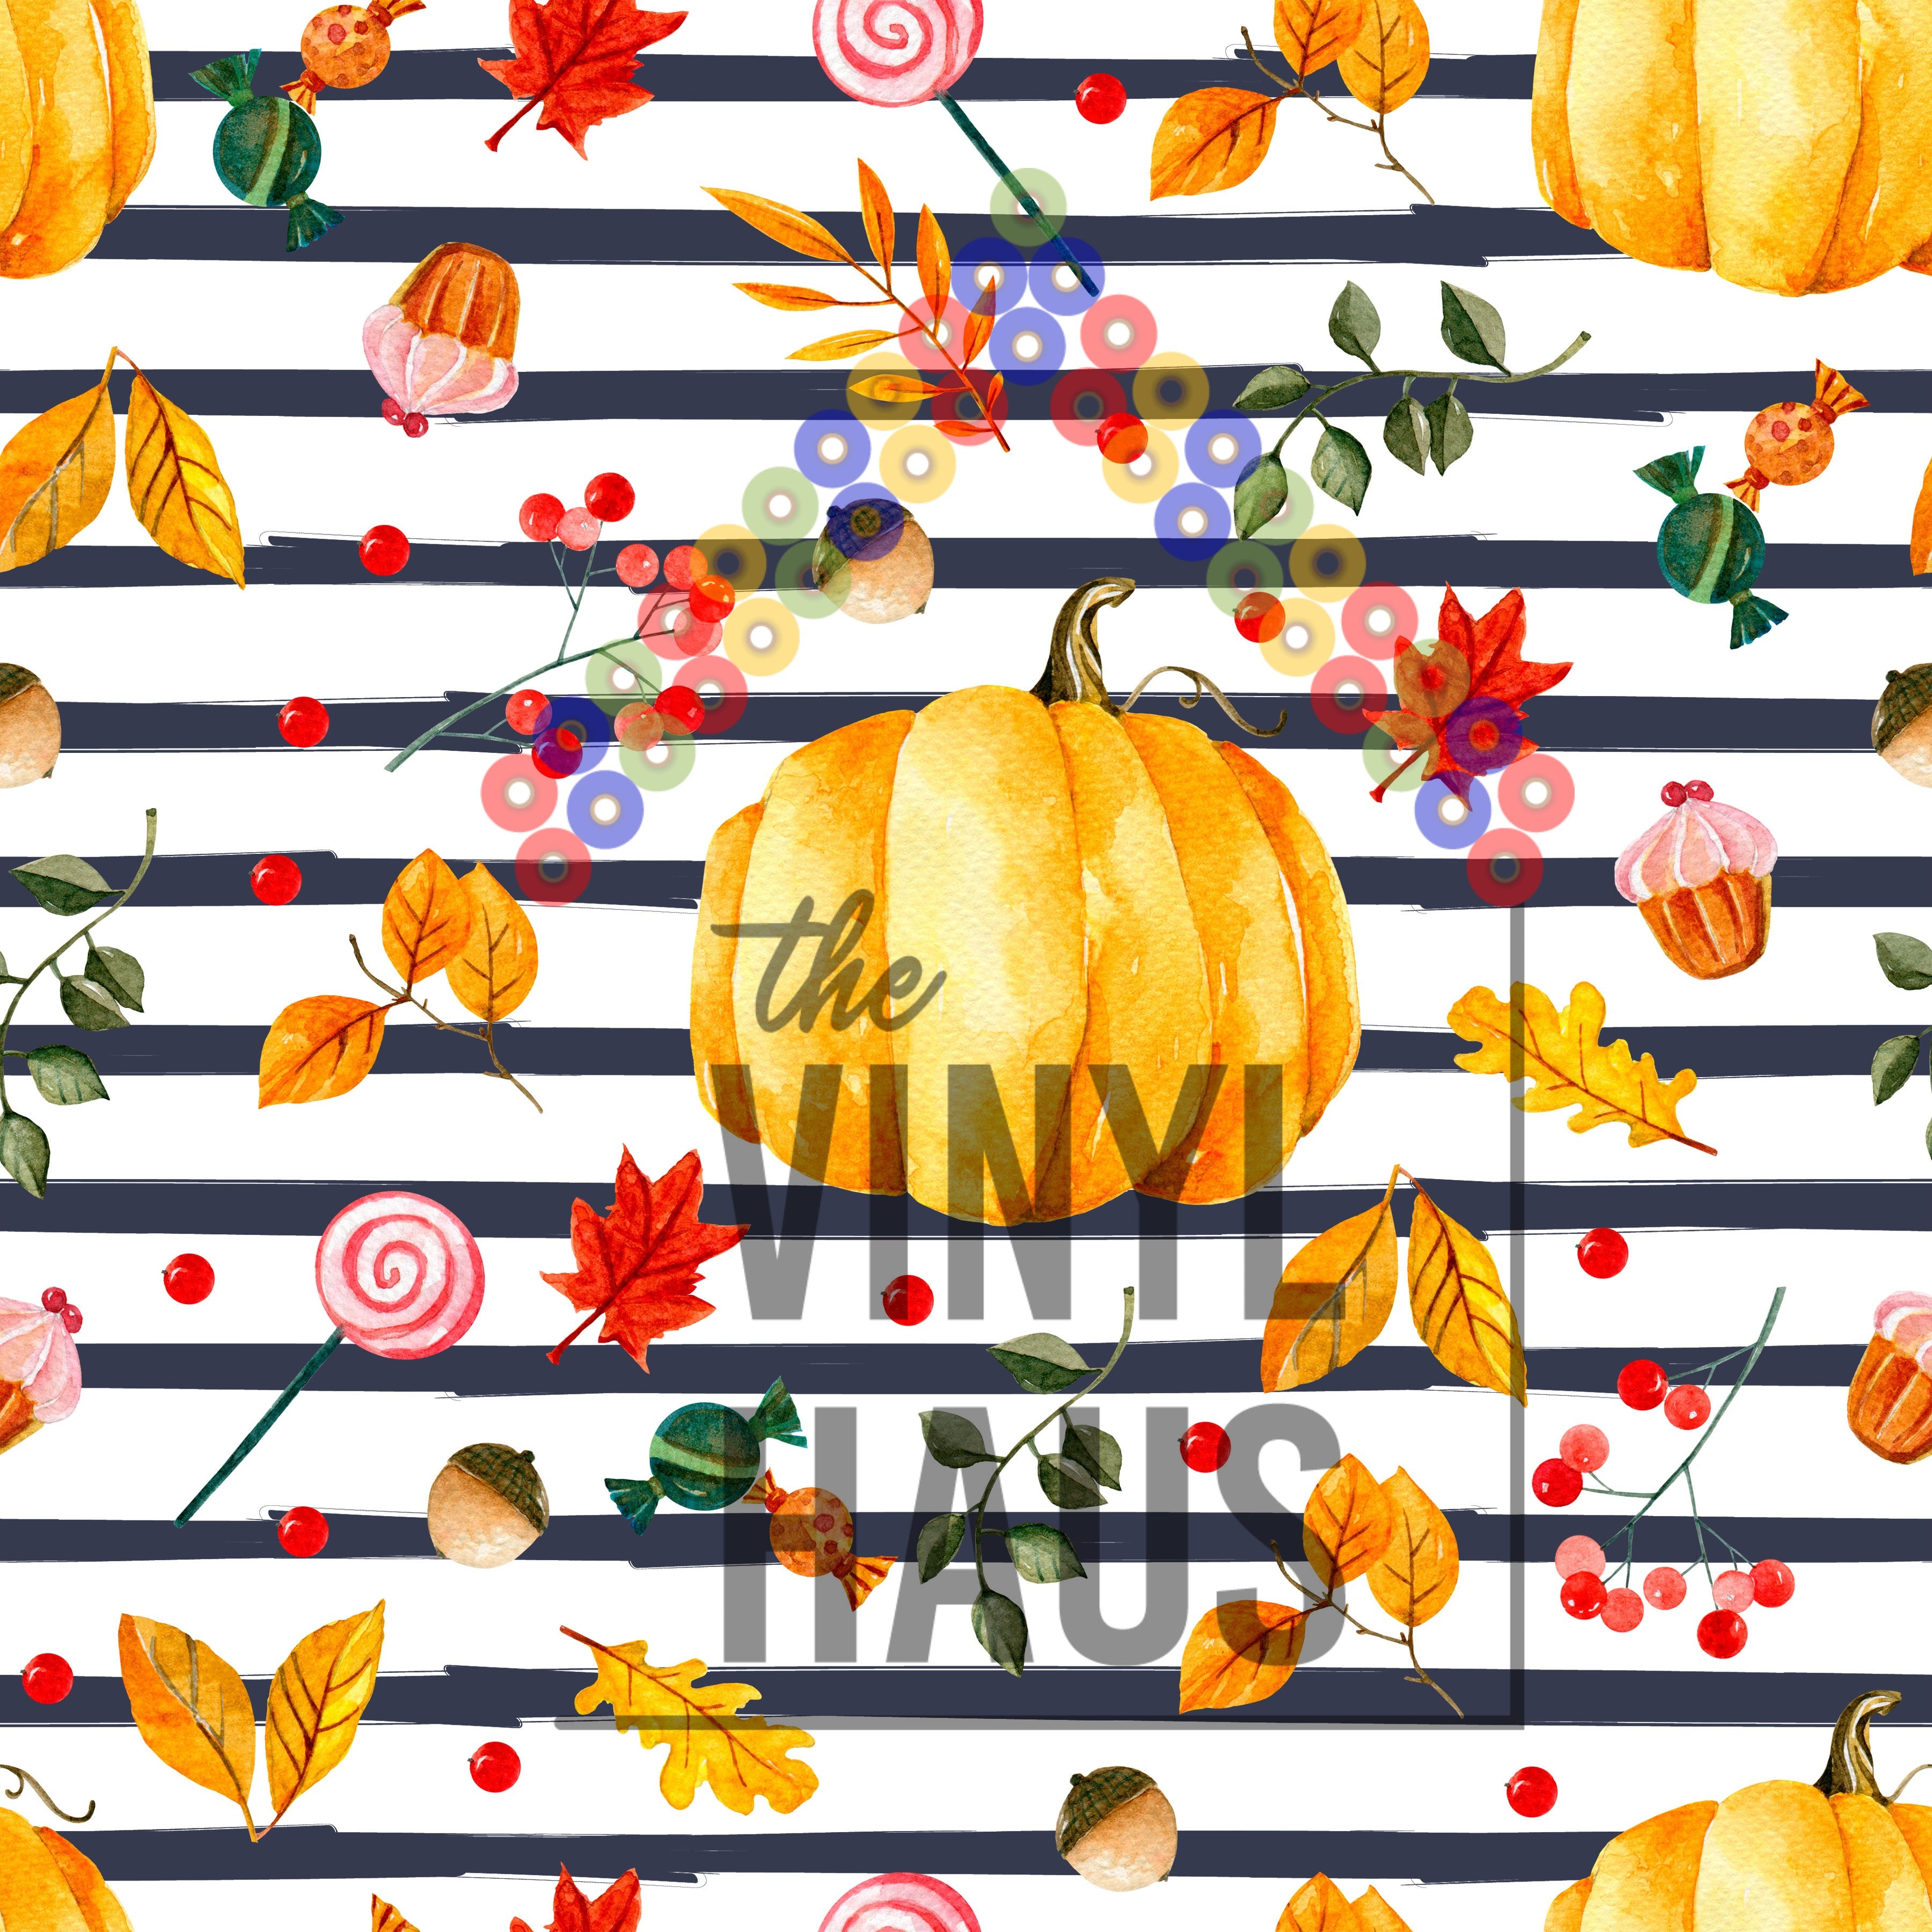 All Things Fall with Stripes Pattern Vinyl 12" x 12" - The Vinyl Haus